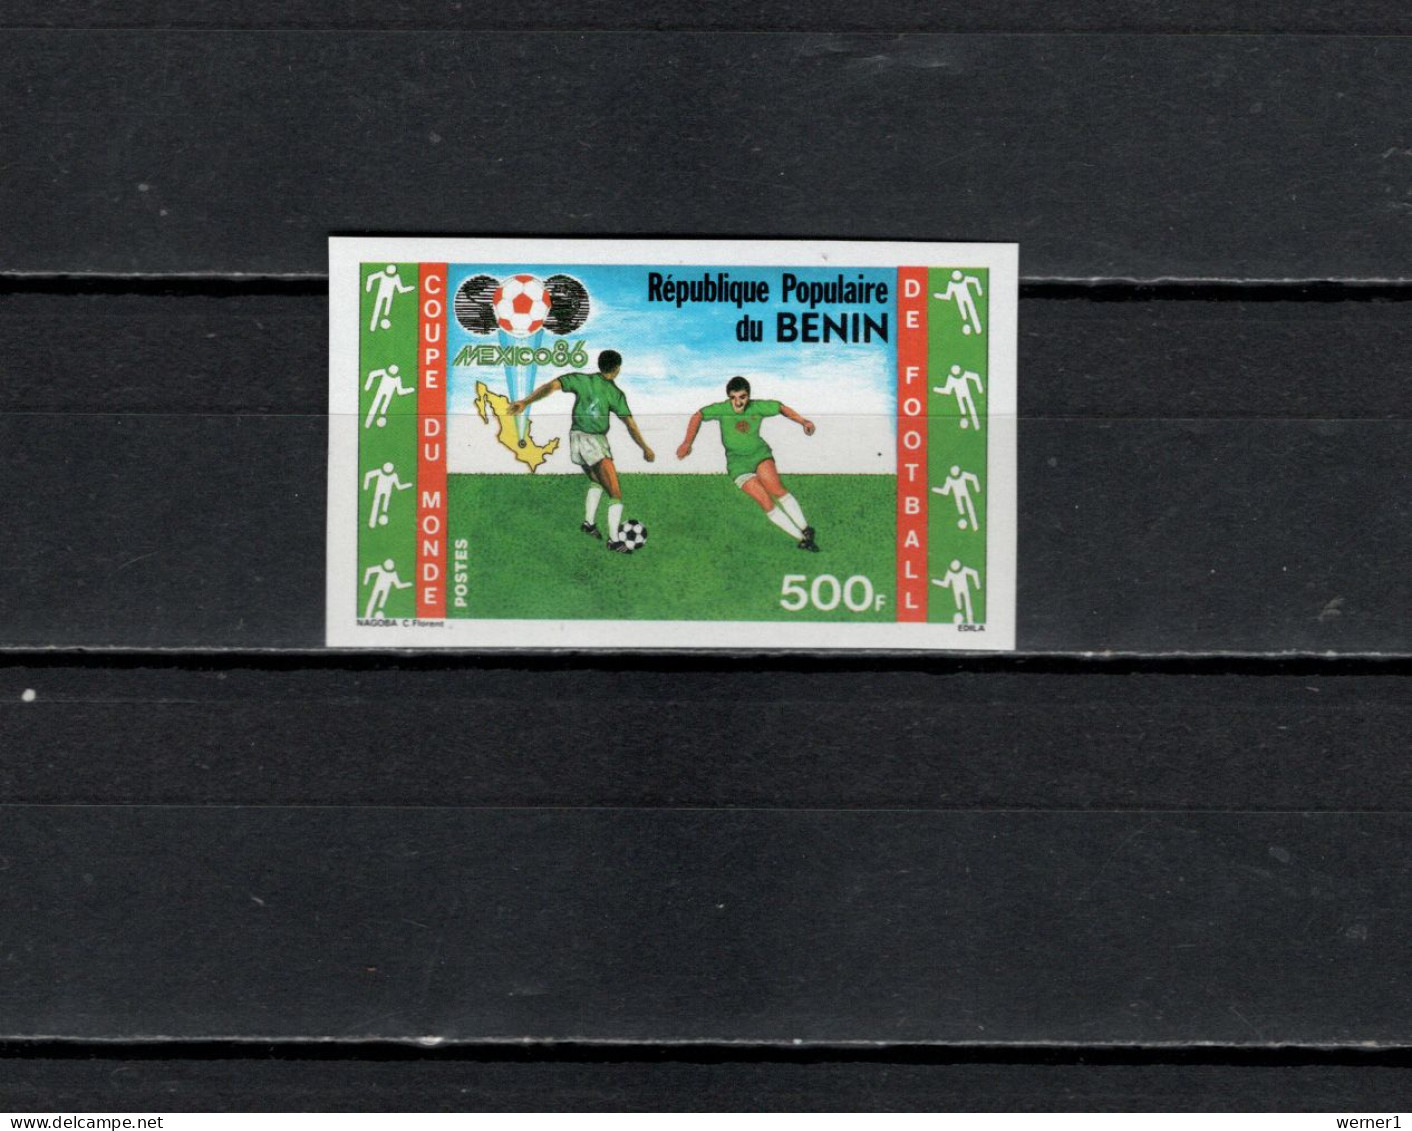 Benin 1986 Football Soccer World Cup Stamp Imperf. MNH -scarce- - 1986 – Mexique